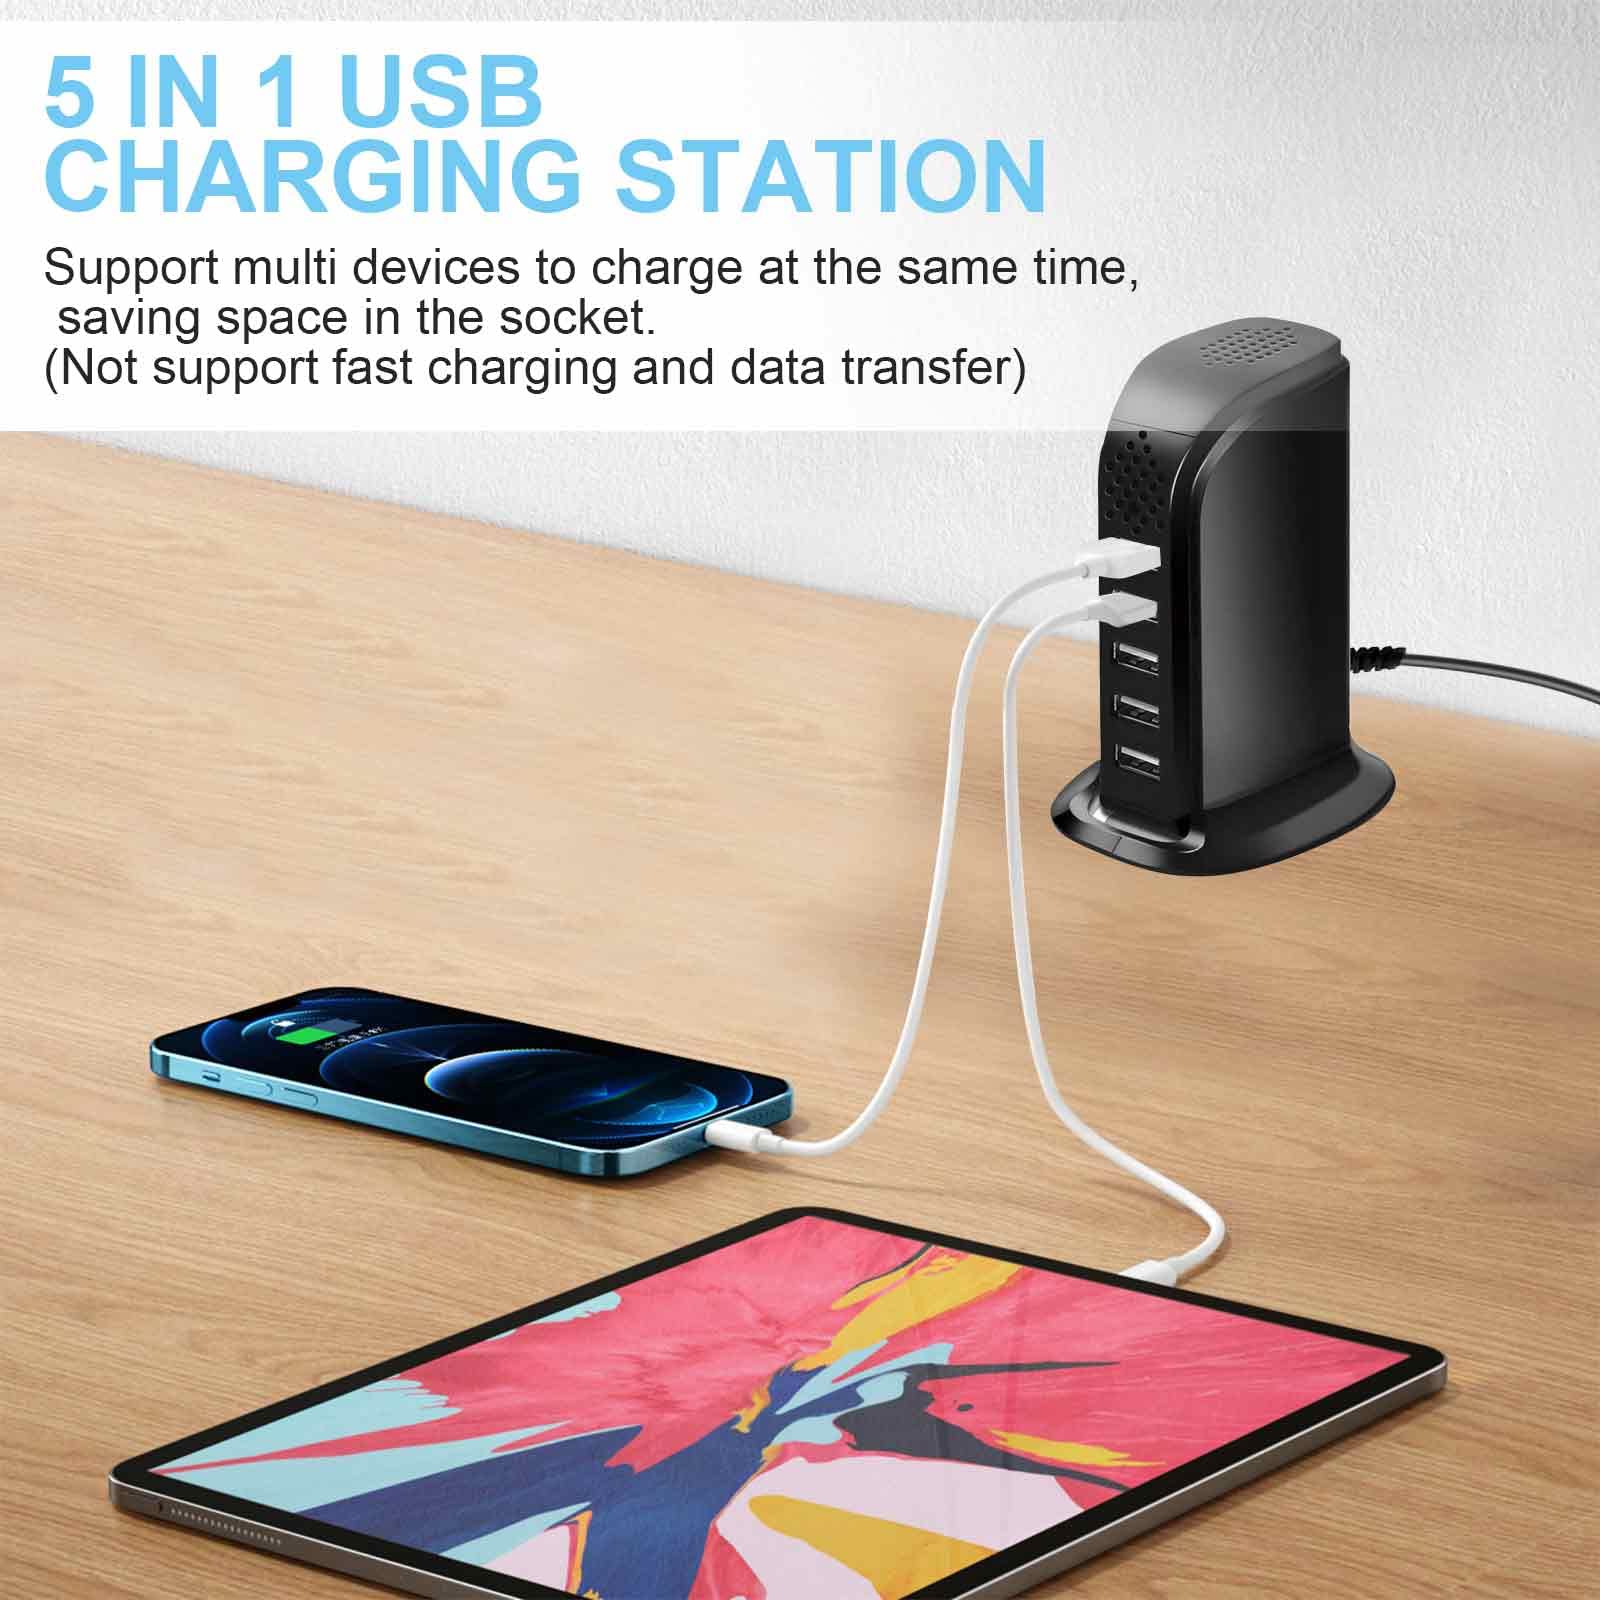 WiFi USB Charger Hidden Camera, Indoor Security Spy Camera with 1080P HD Video Recording, APP Remote View, Motion Detection Alarm Push, 5-Port USB Charging Station, Secret Nanny Cam for Home/Office